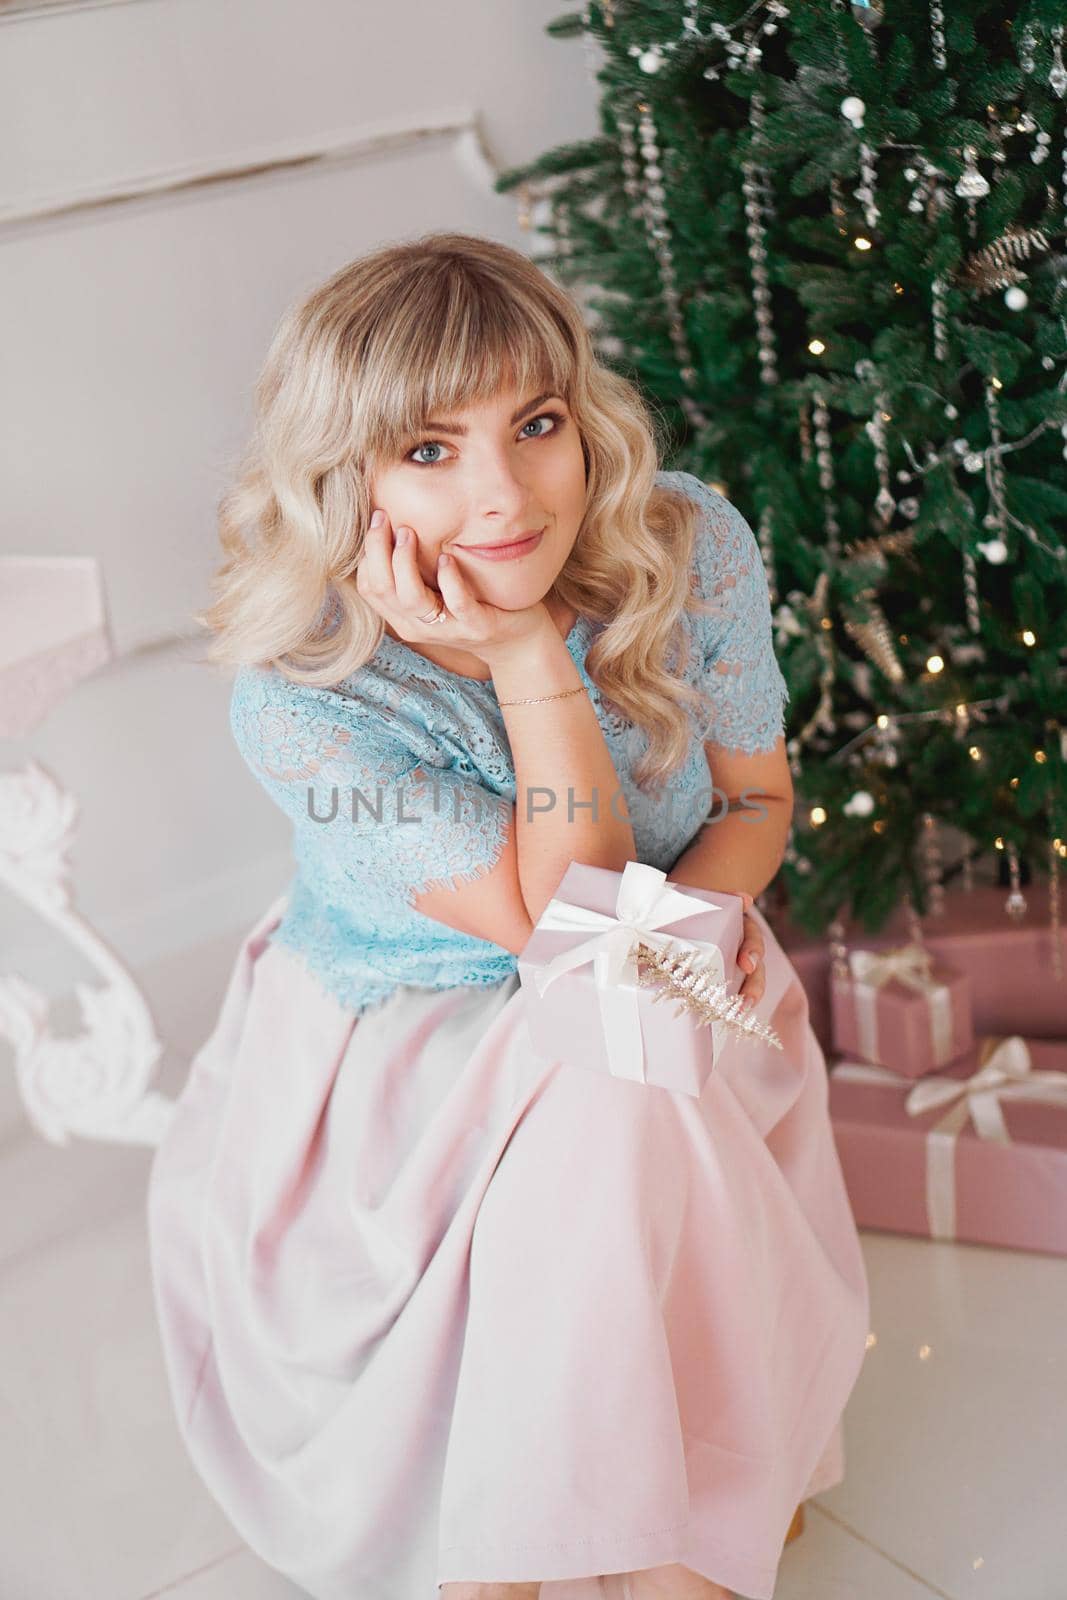 Lovely young woman with elegant style sitting indoor with pink Christmas present by natali_brill